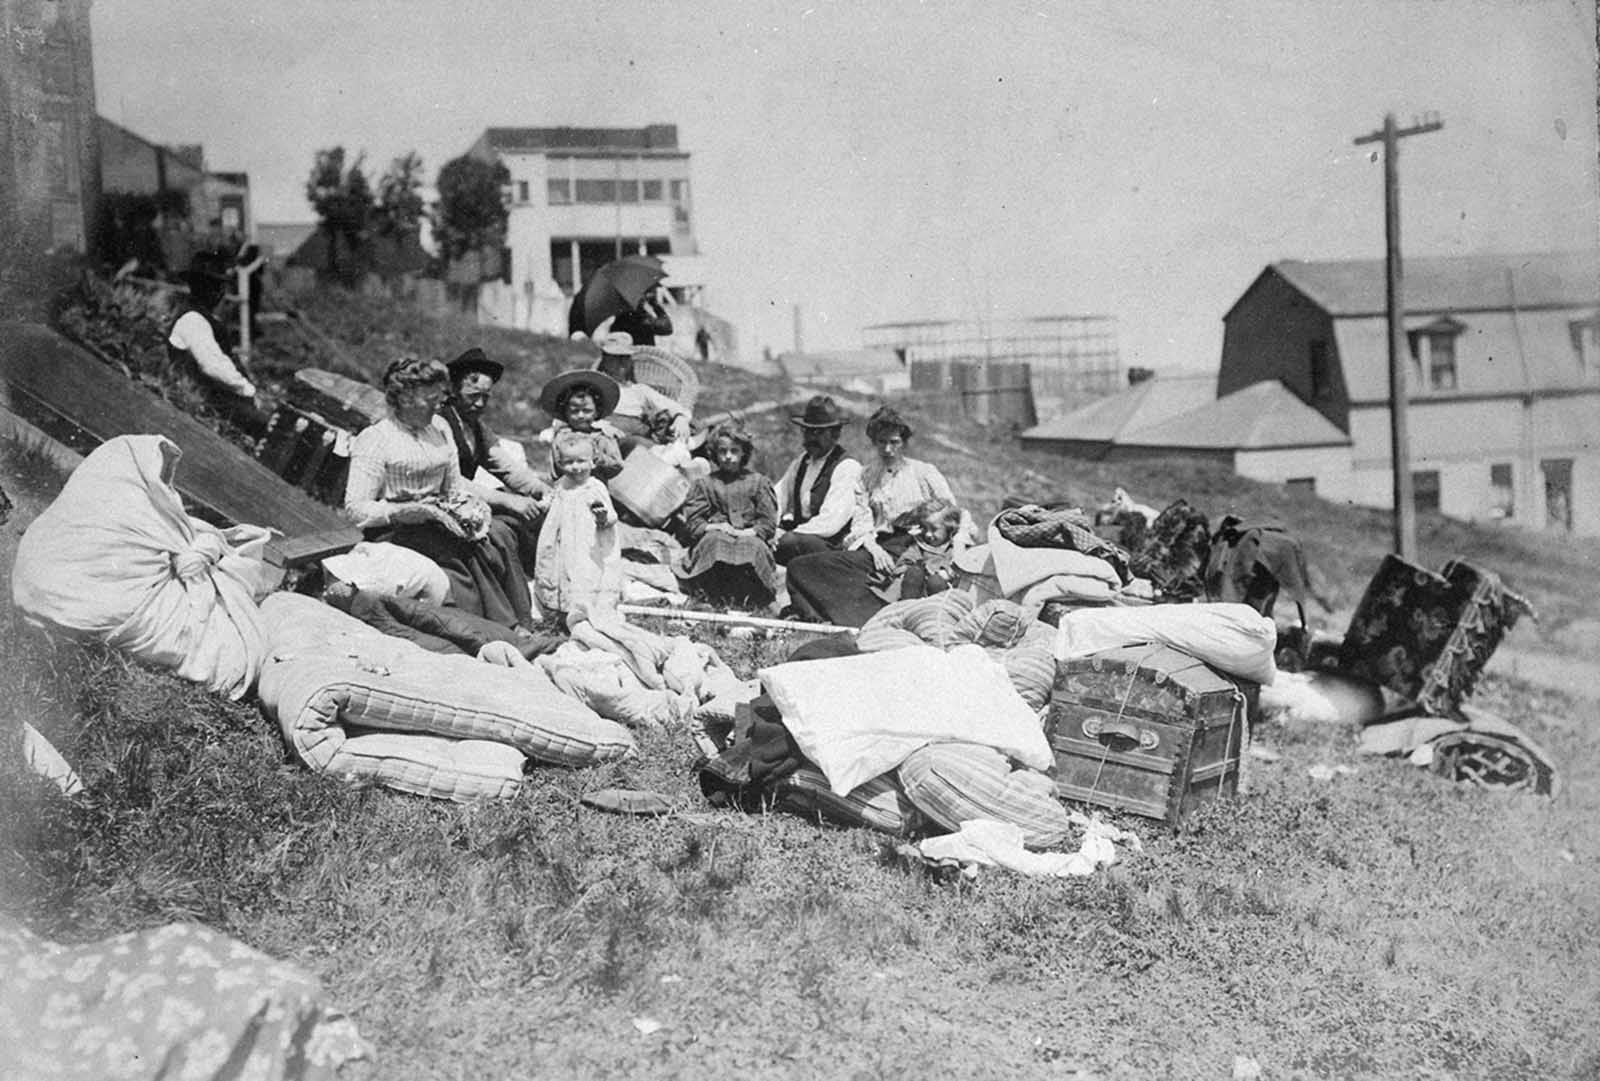 Refugees from the disaster rest on a hillside.